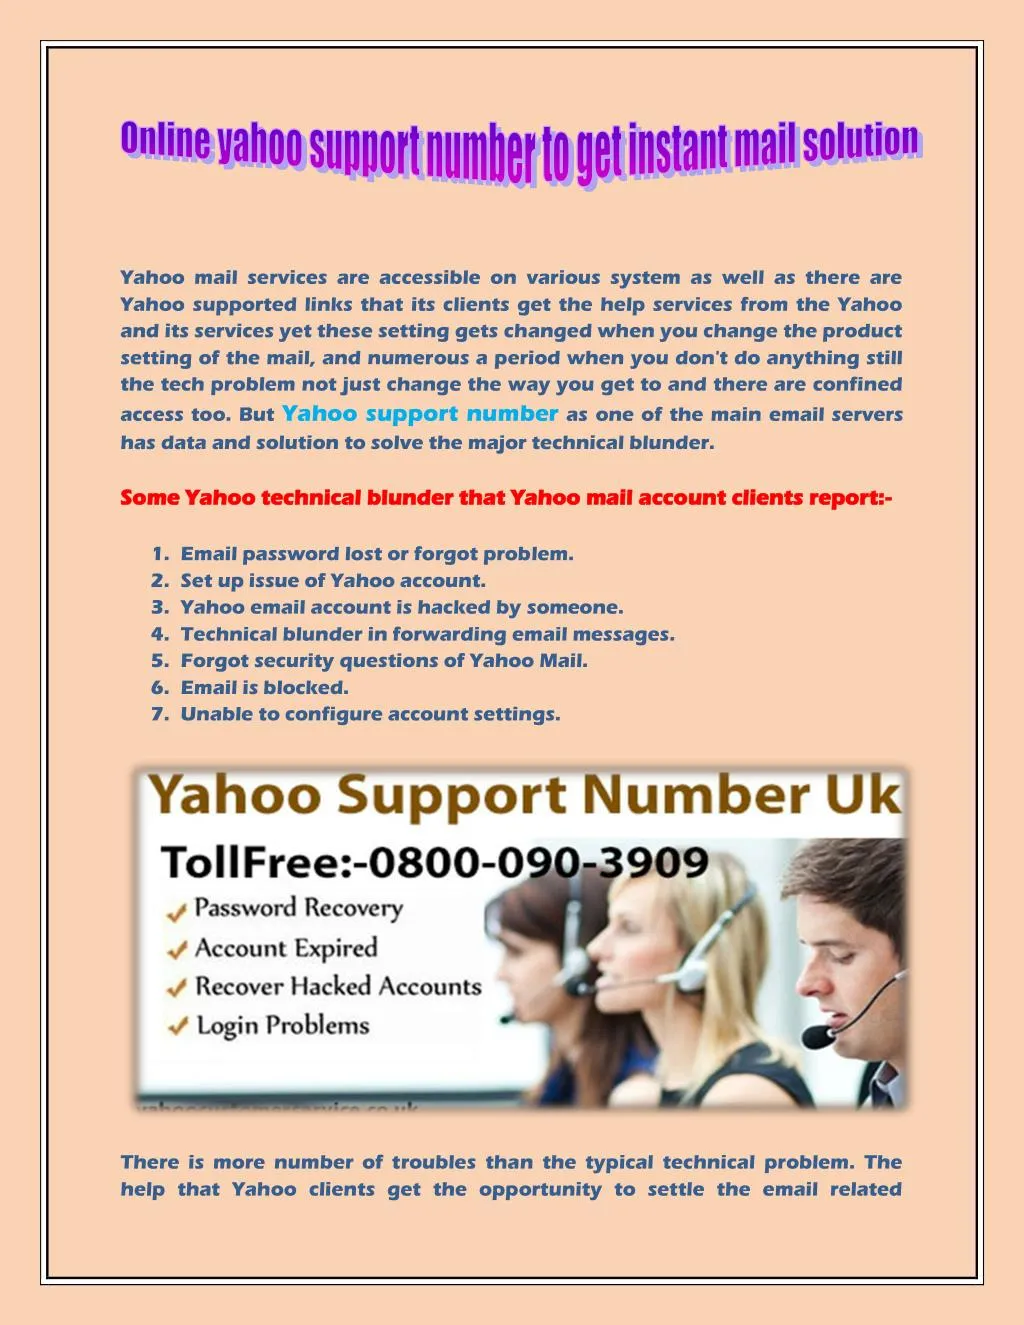 yahoo mail services are accessible on various